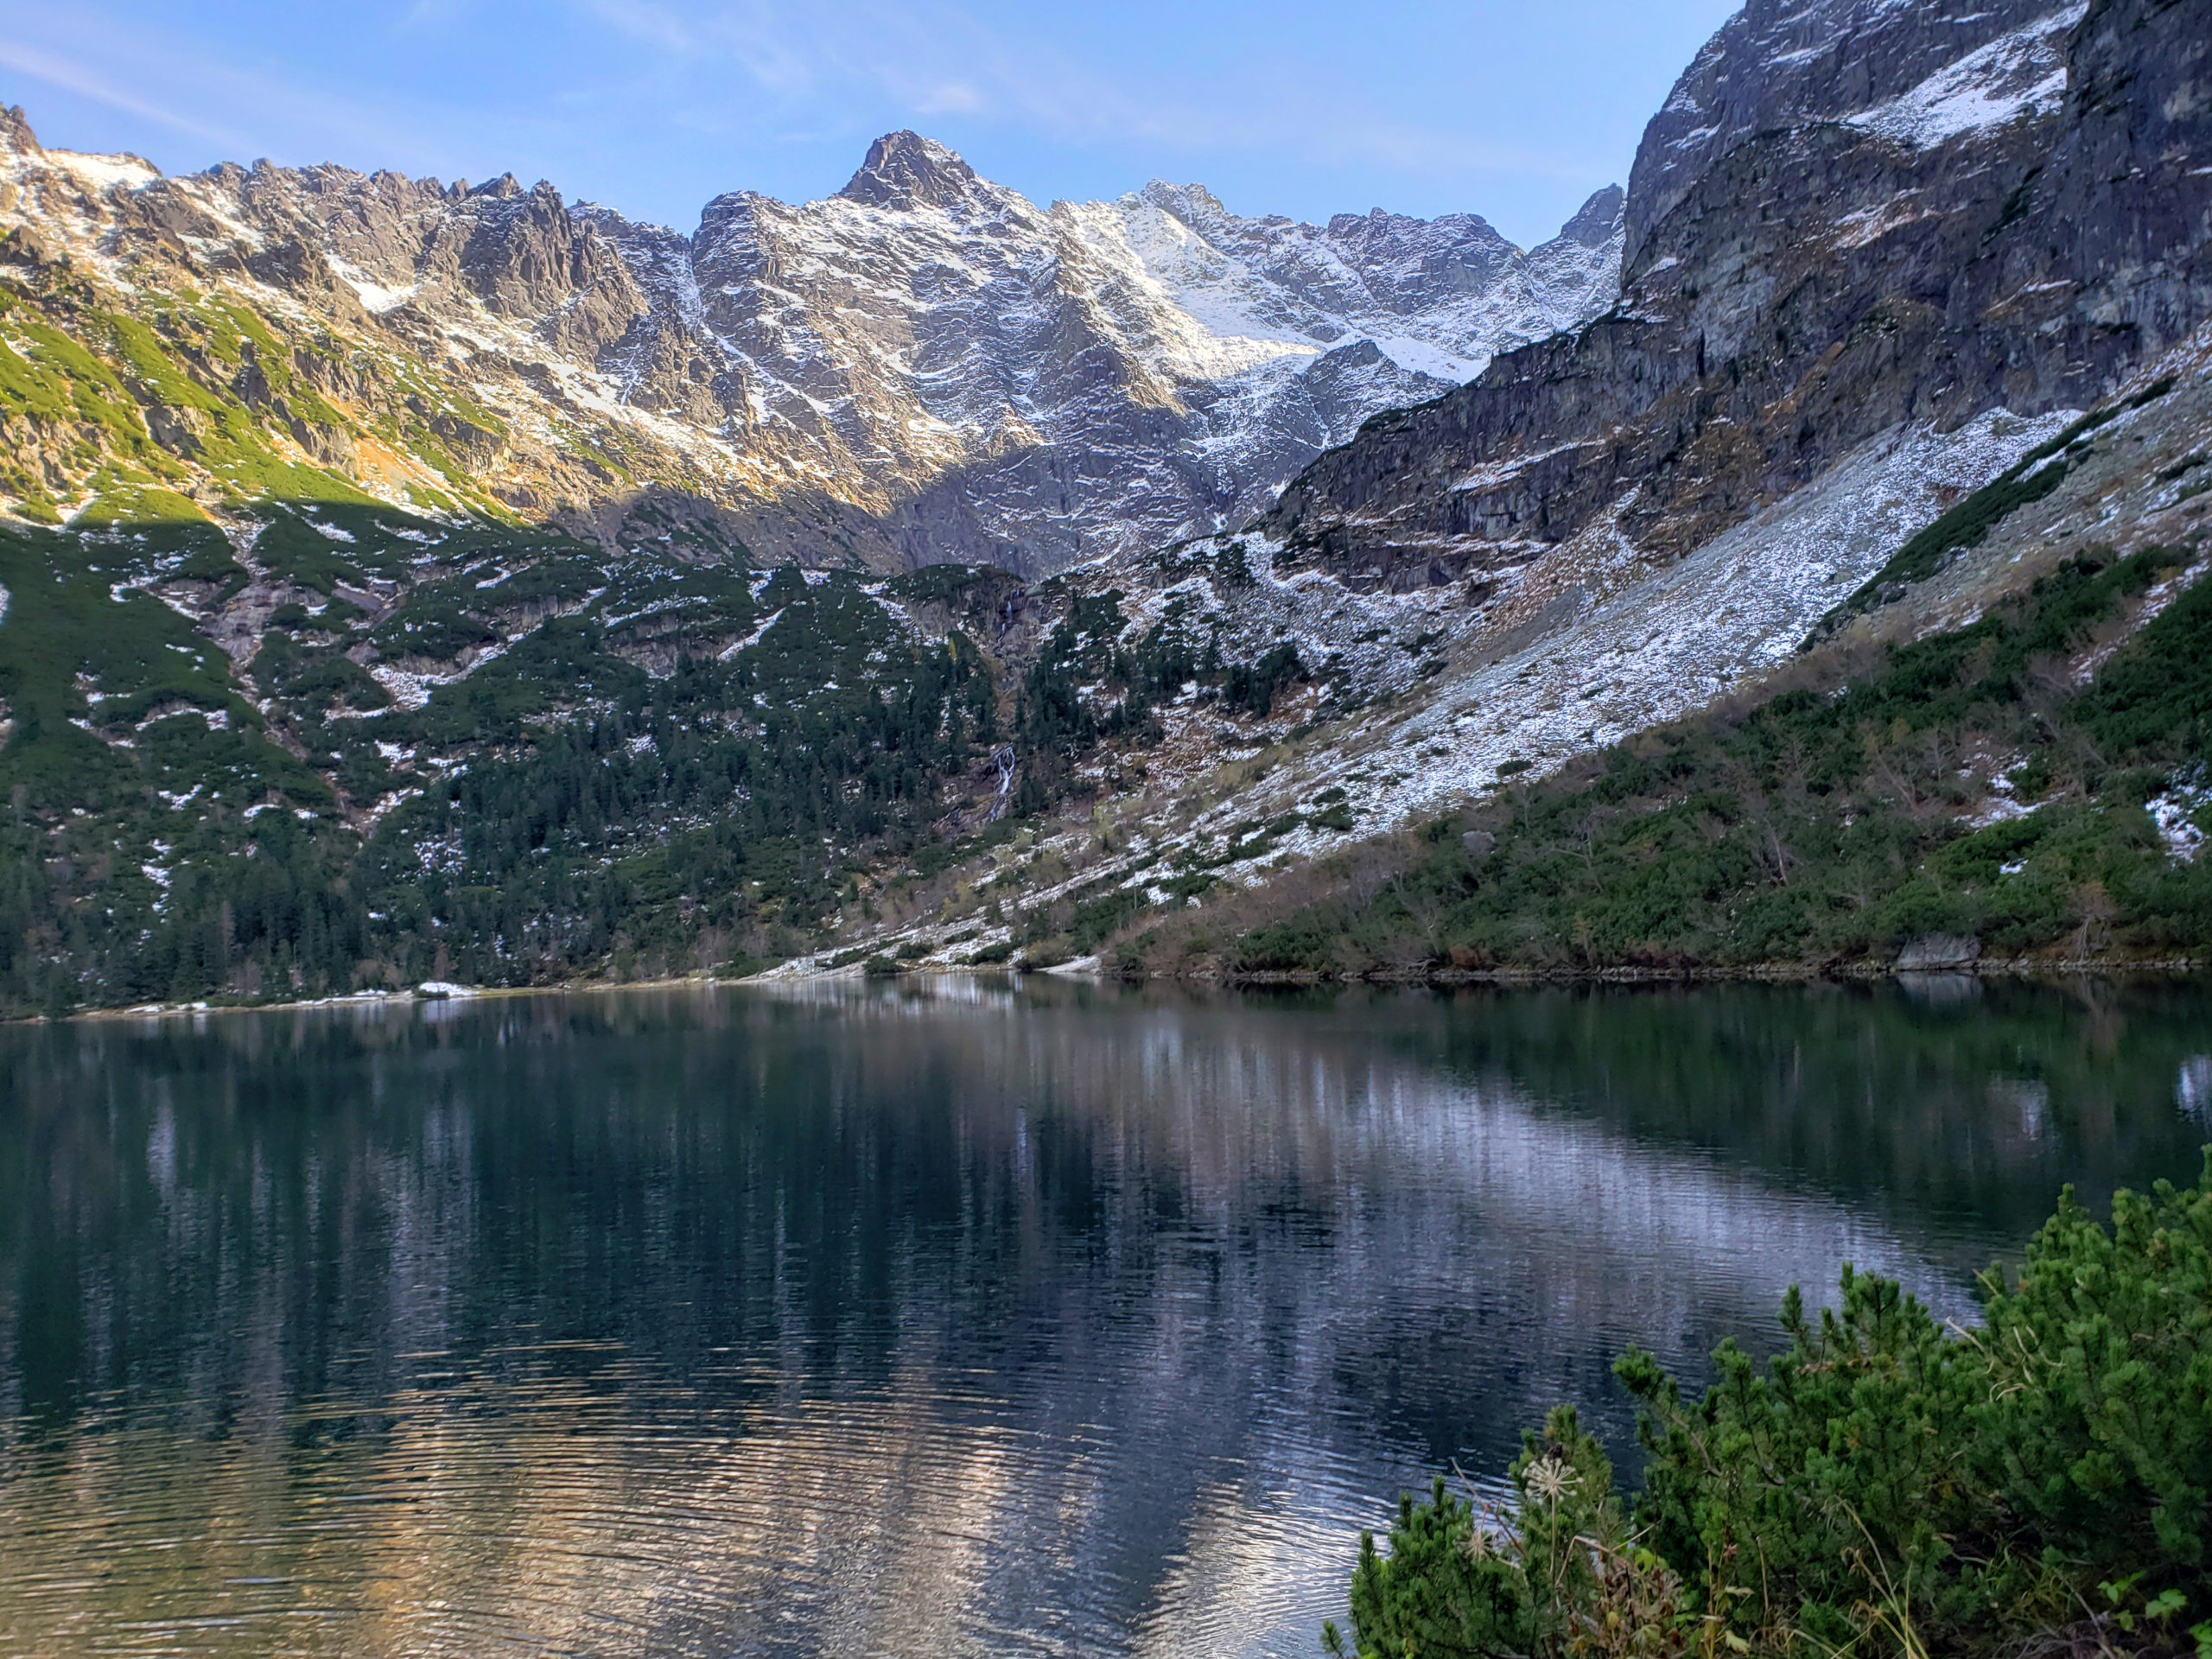 The Complete Guide To Hiking To Morskie Oko - Poland's Most Beautiful Lake In The Tatra Mountains